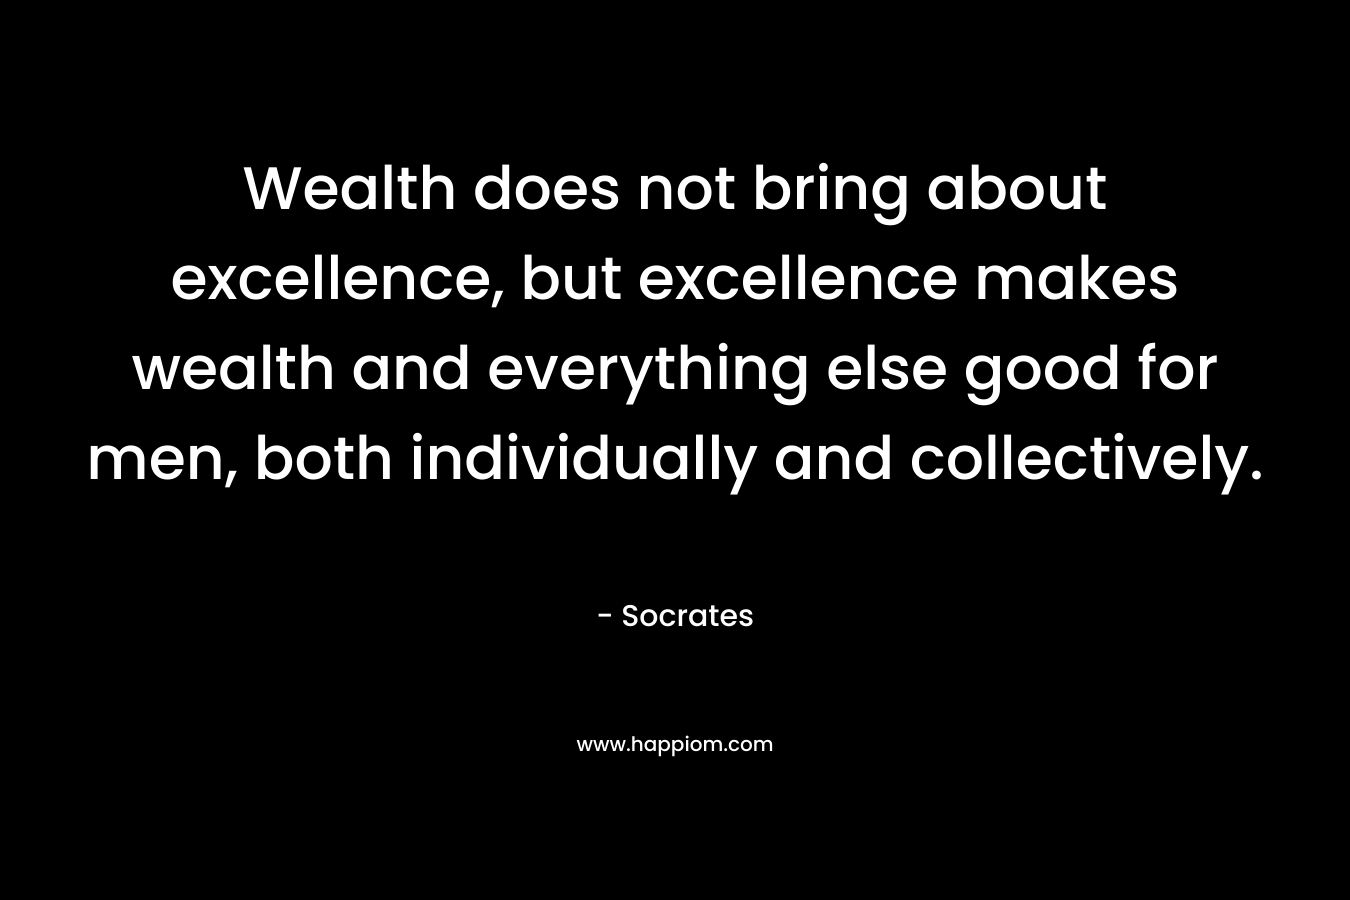 Wealth does not bring about excellence, but excellence makes wealth and everything else good for men, both individually and collectively.